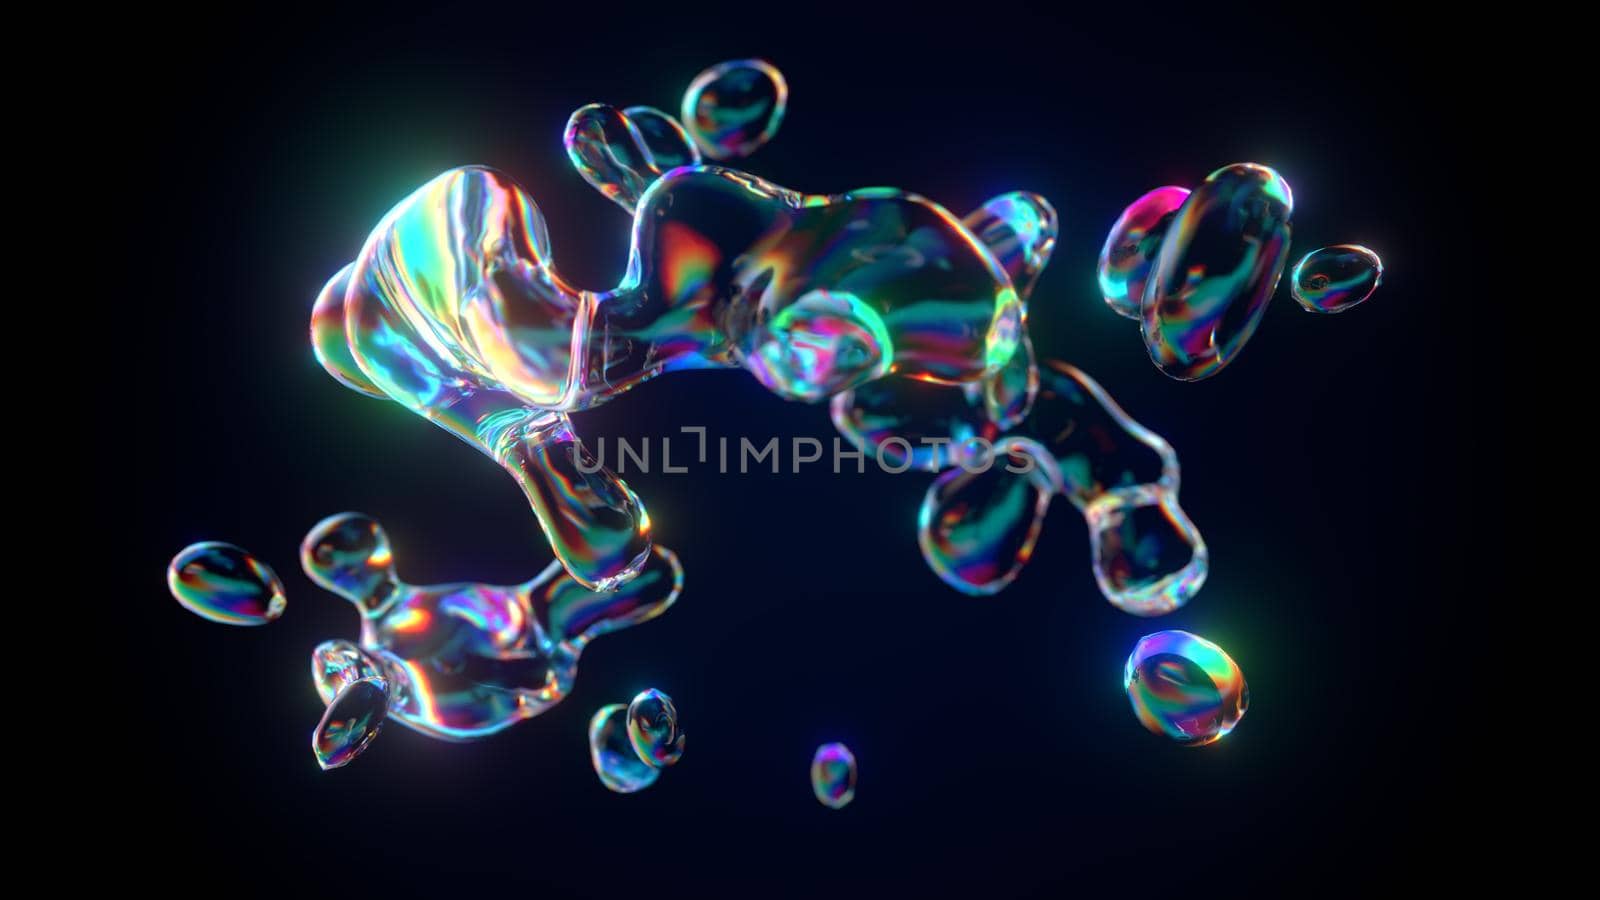 Abstract glass shape with rainbow reflections and refractions 3d render